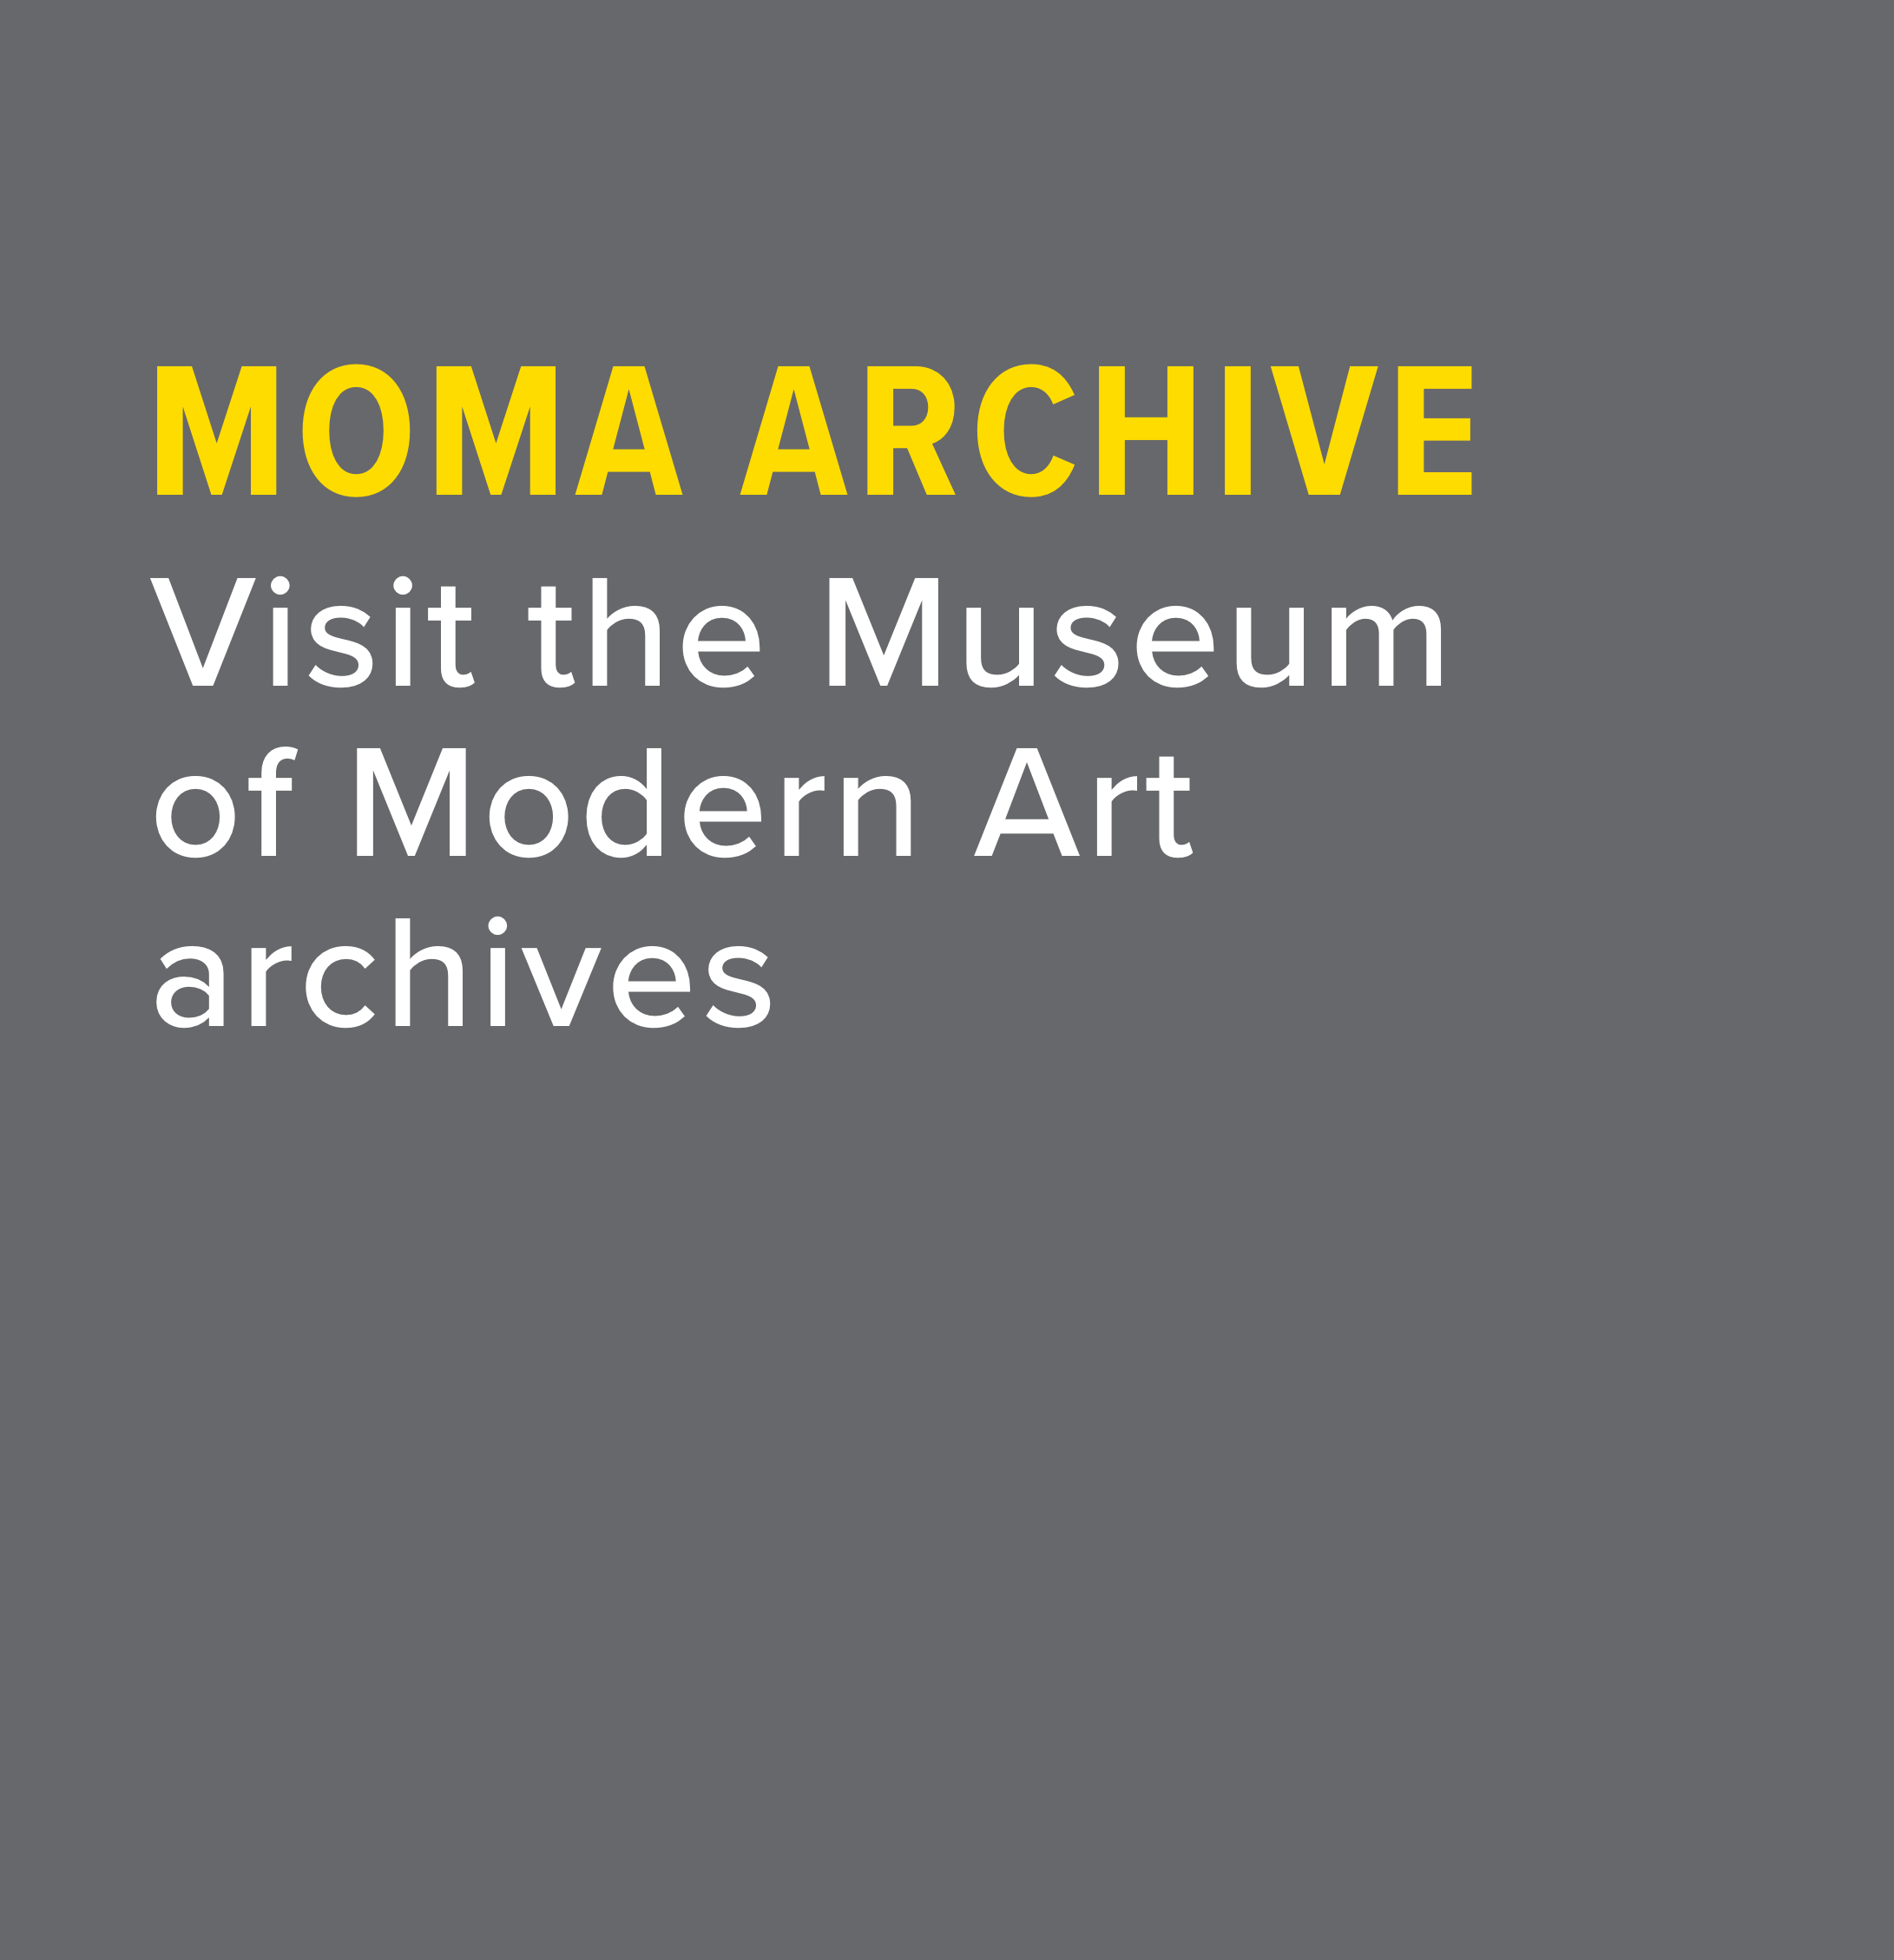 Visit the Museum of Modern Art archives